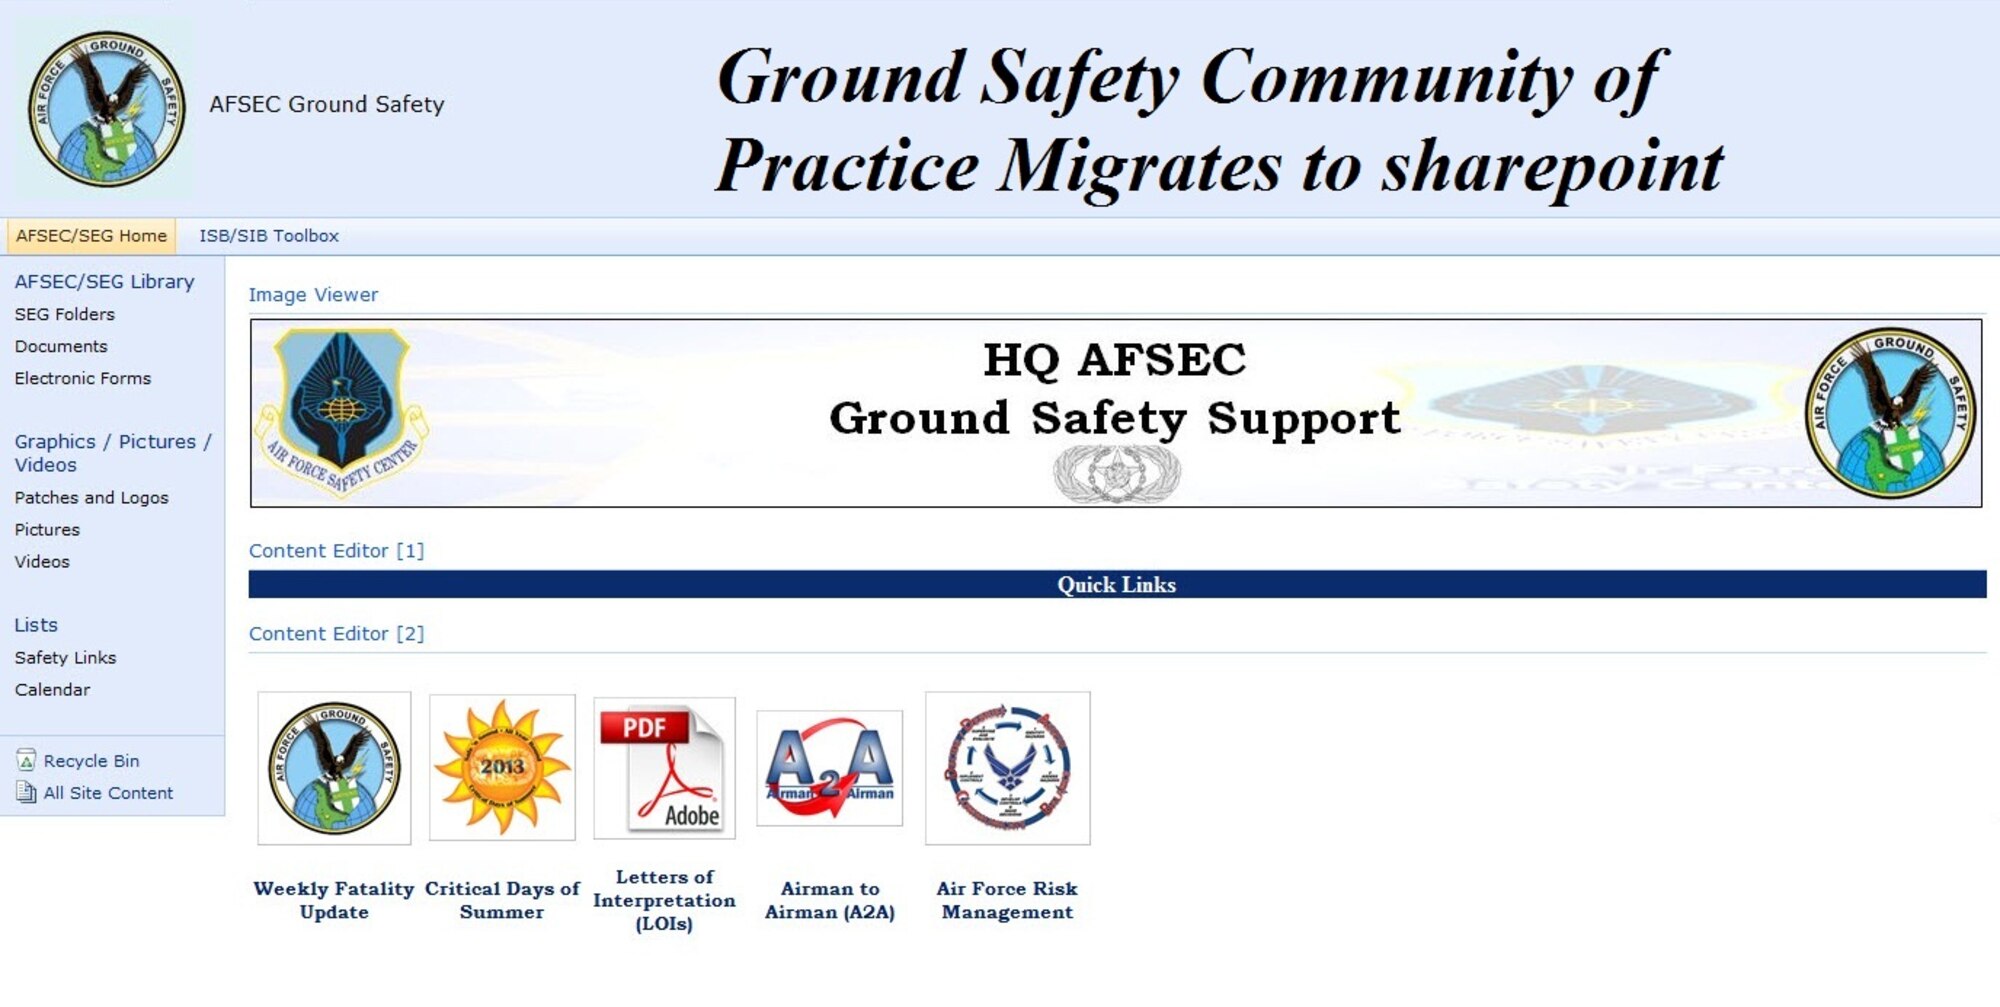 Air Force ground safety Community of Practice (CoP) migrates to sharepoint.